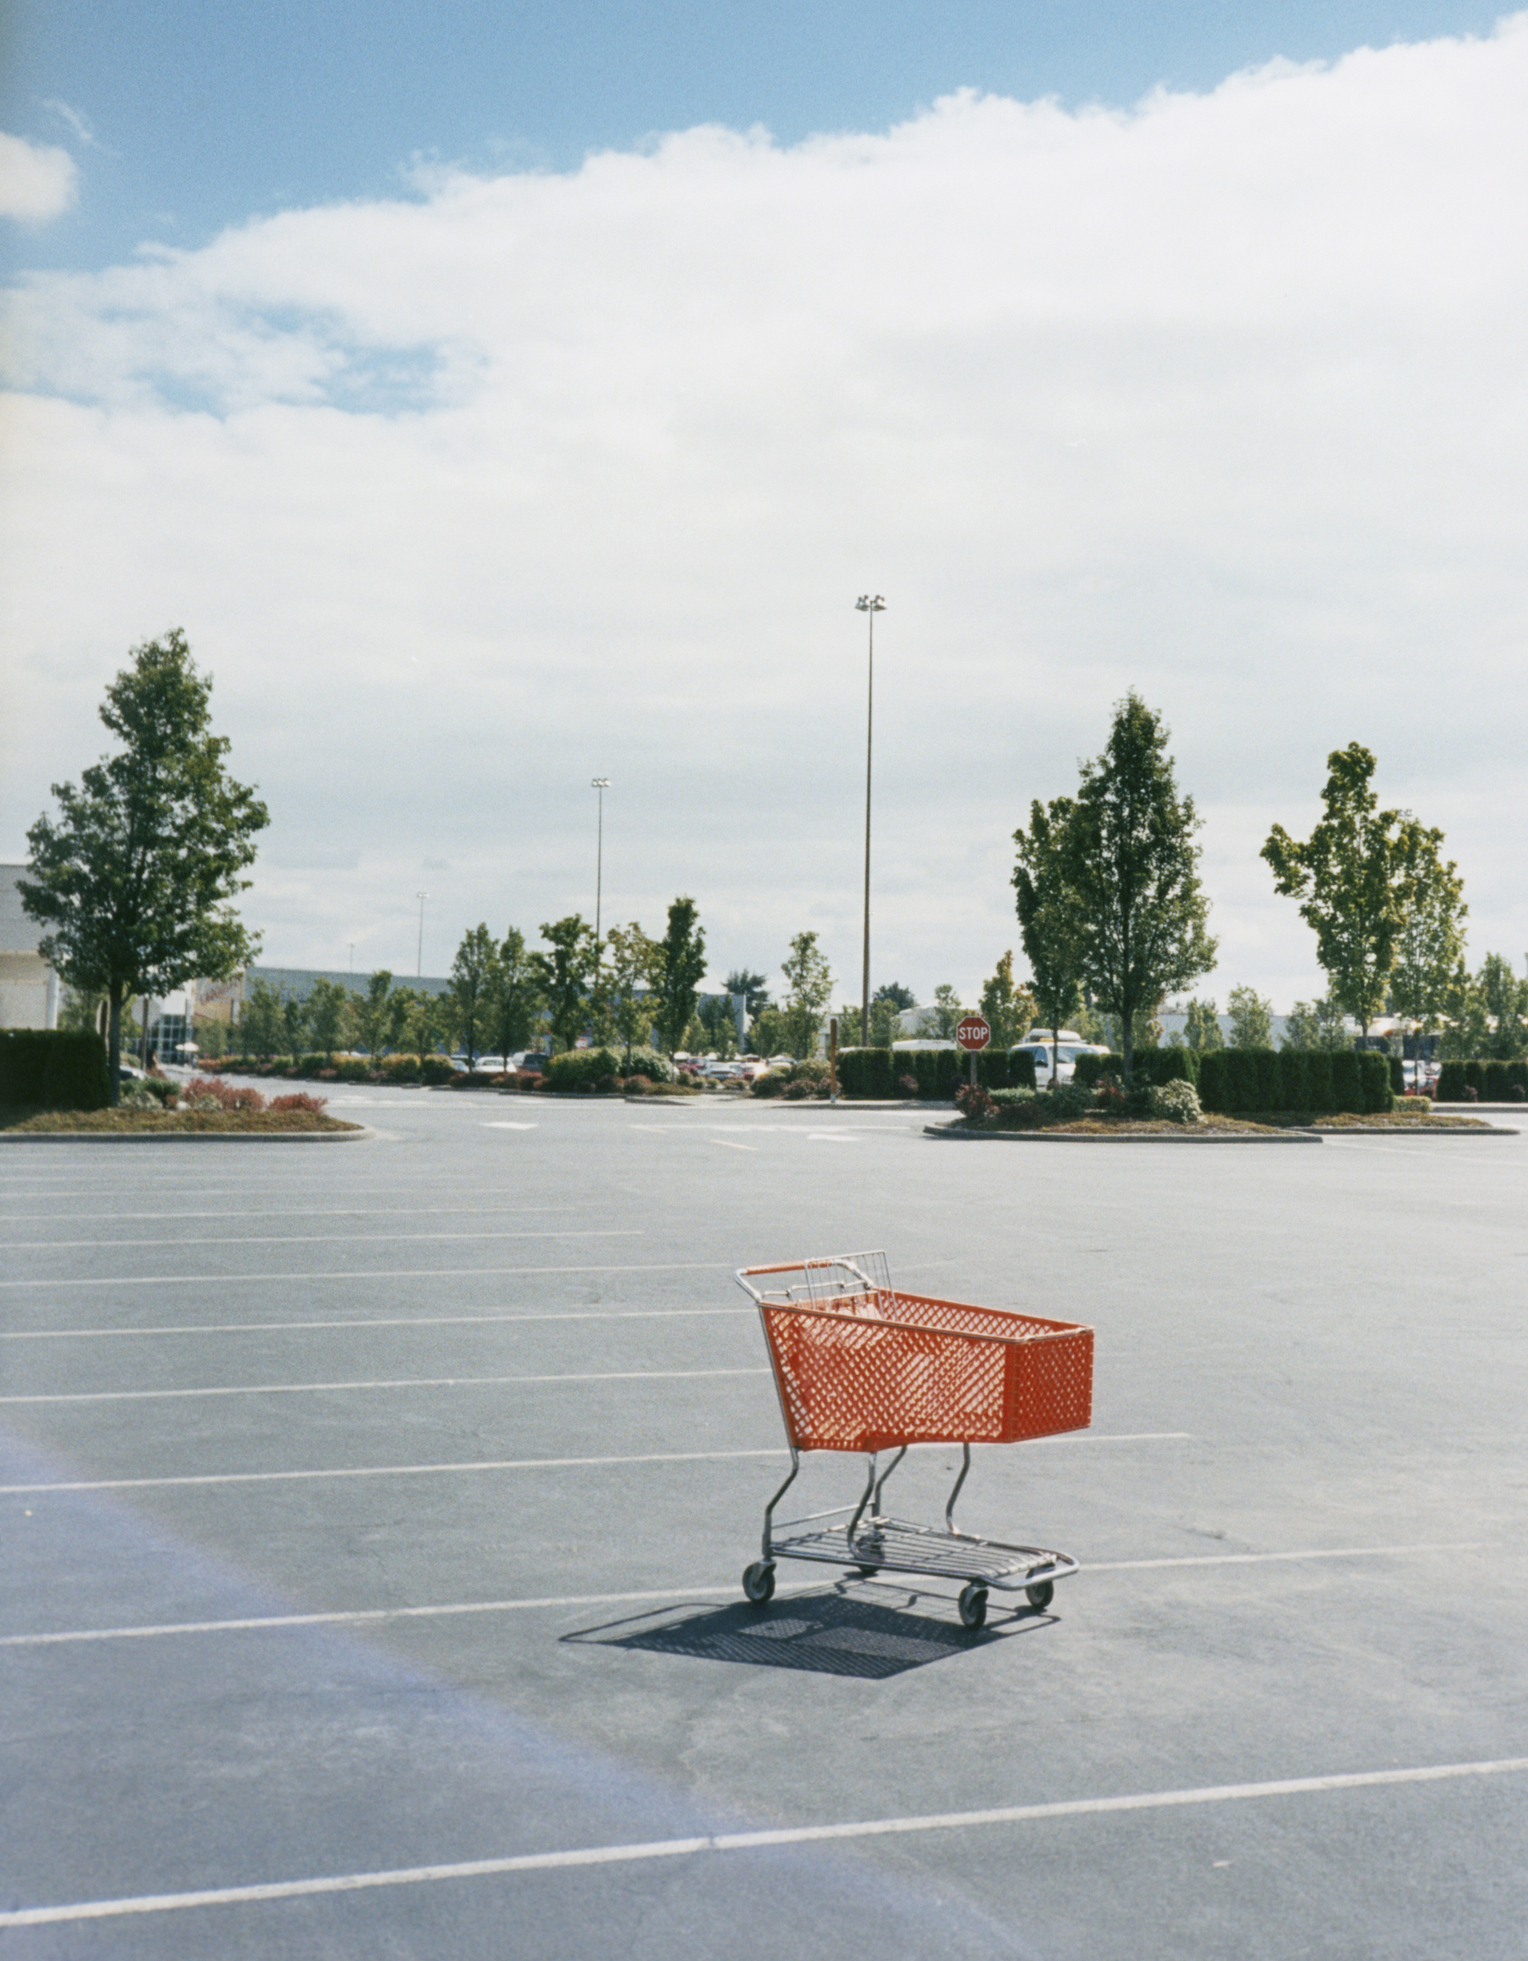 a grocery cart in a parking lot